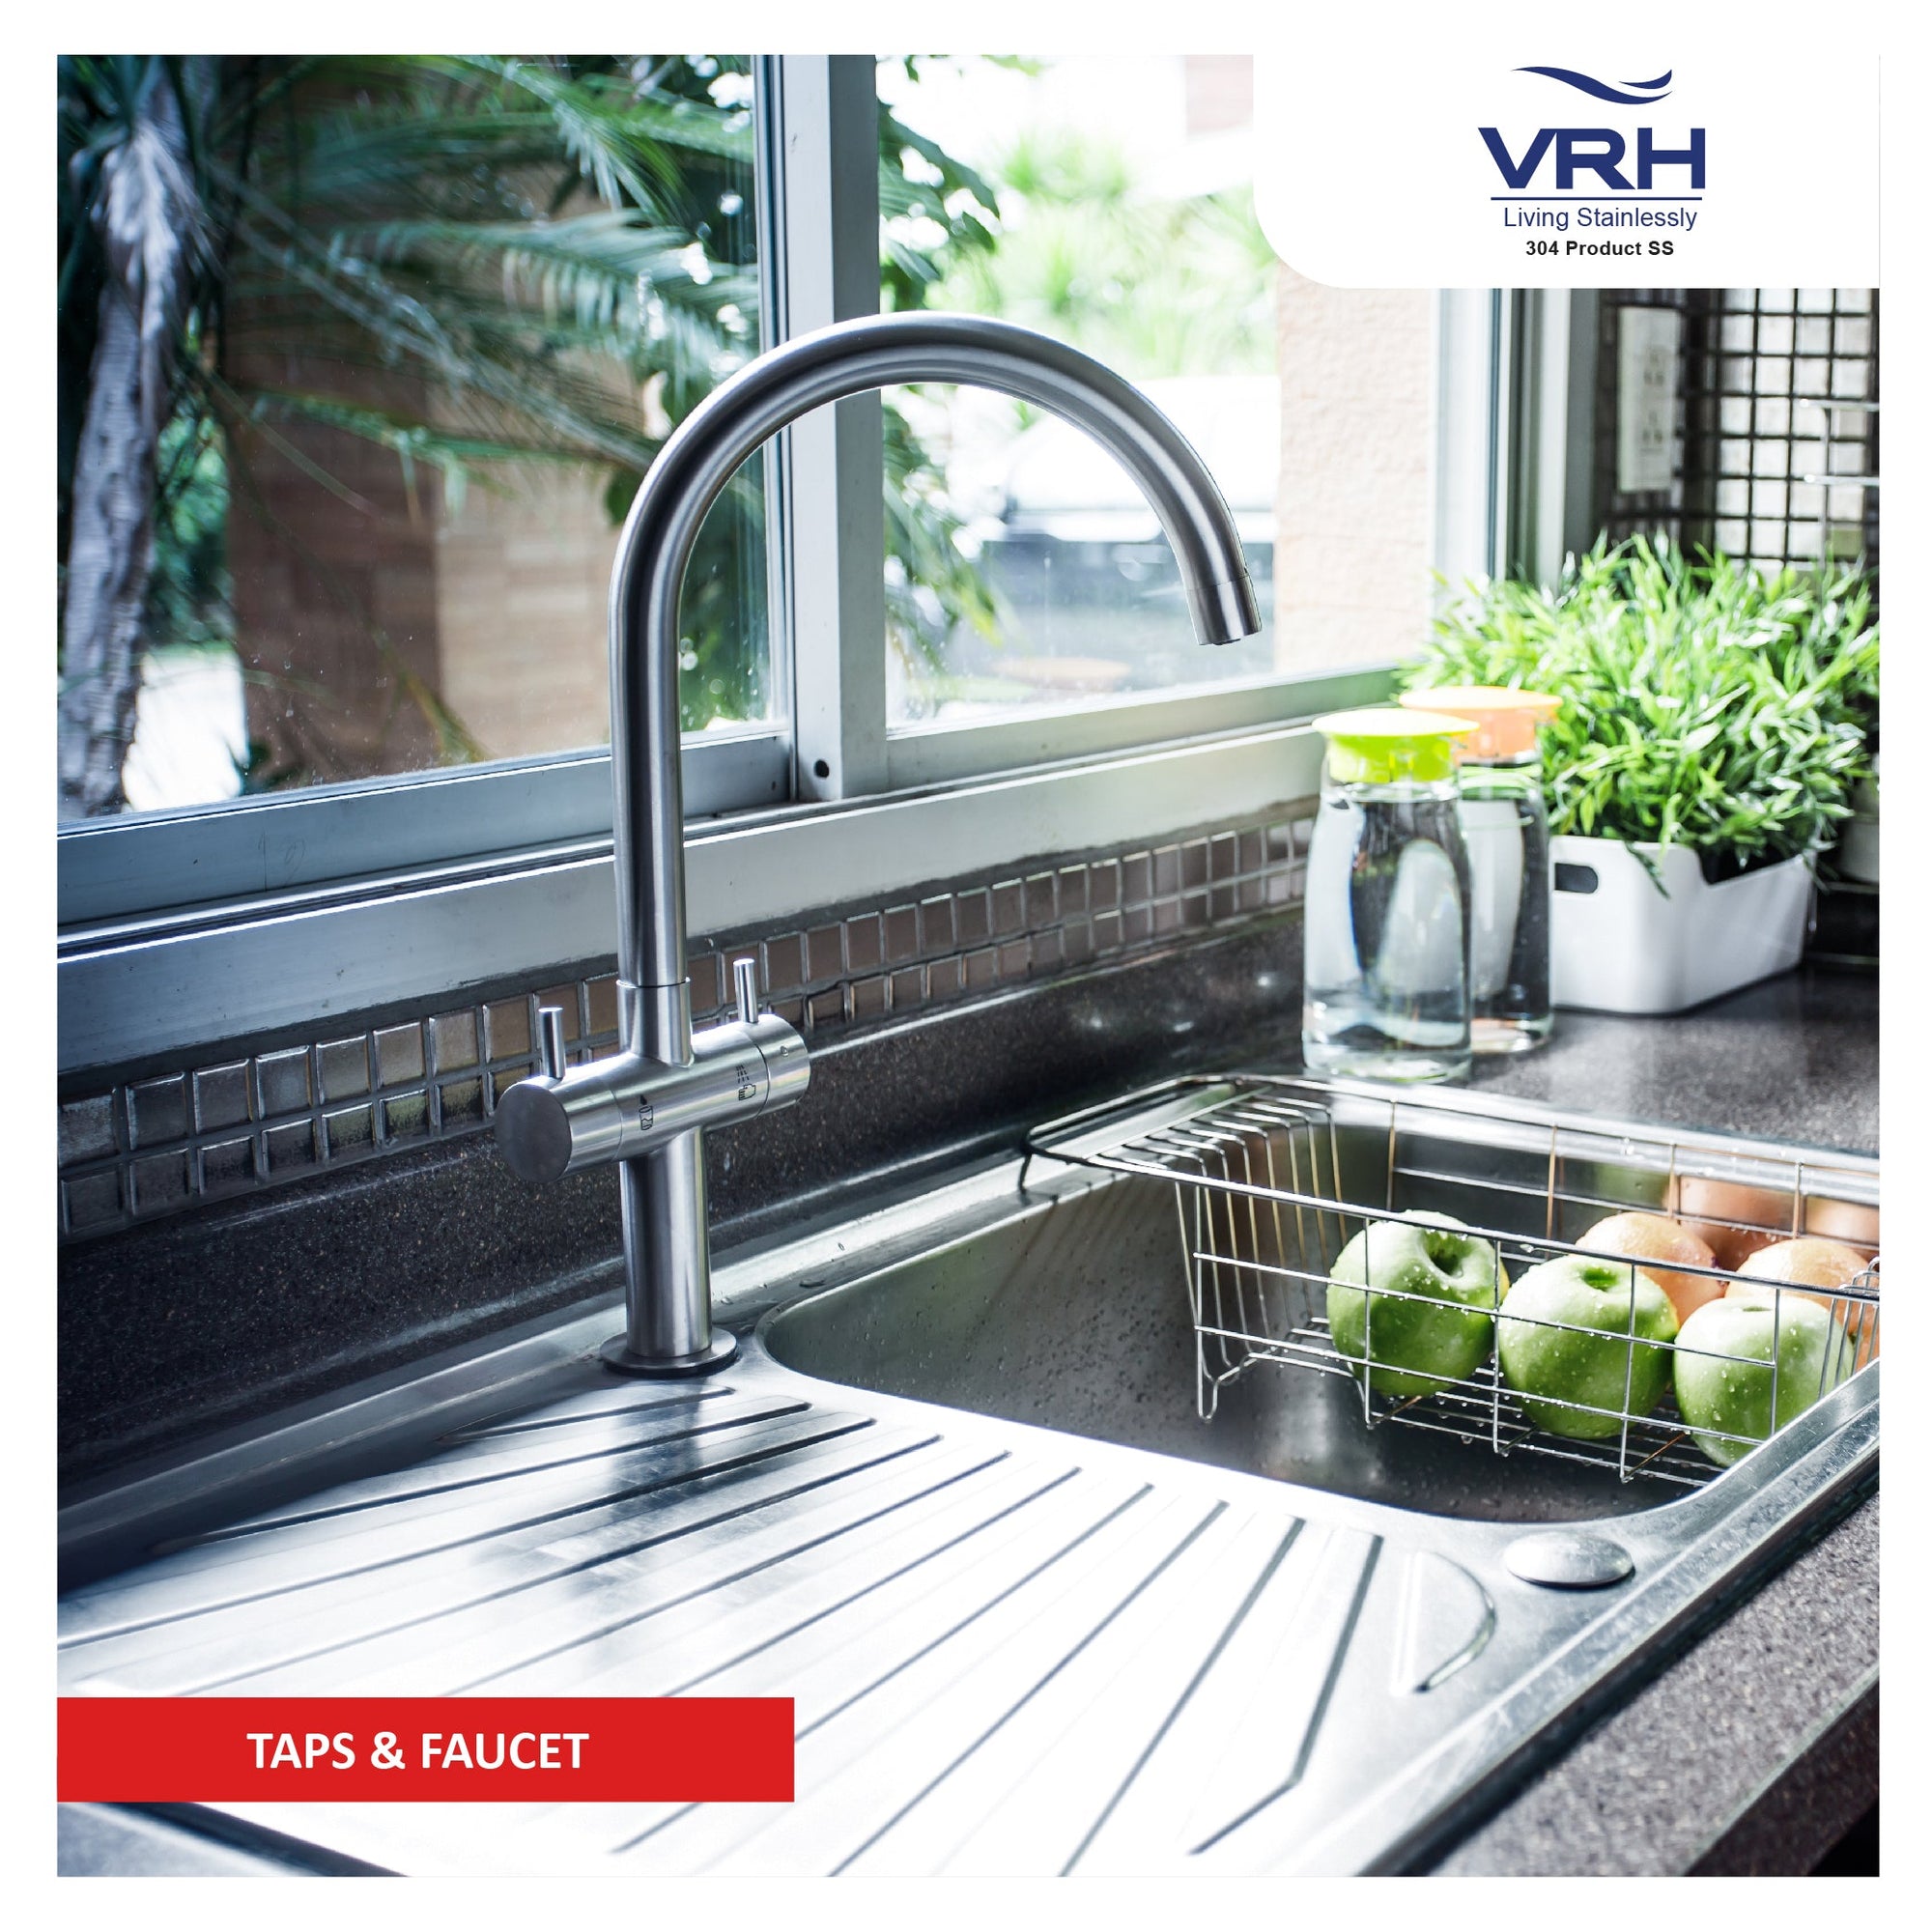 VRH Taps & Faucets - Premium Bathroom and Kitchen Fixtures - Shop at M. M. Noorbhoy & Co for Quality and Style